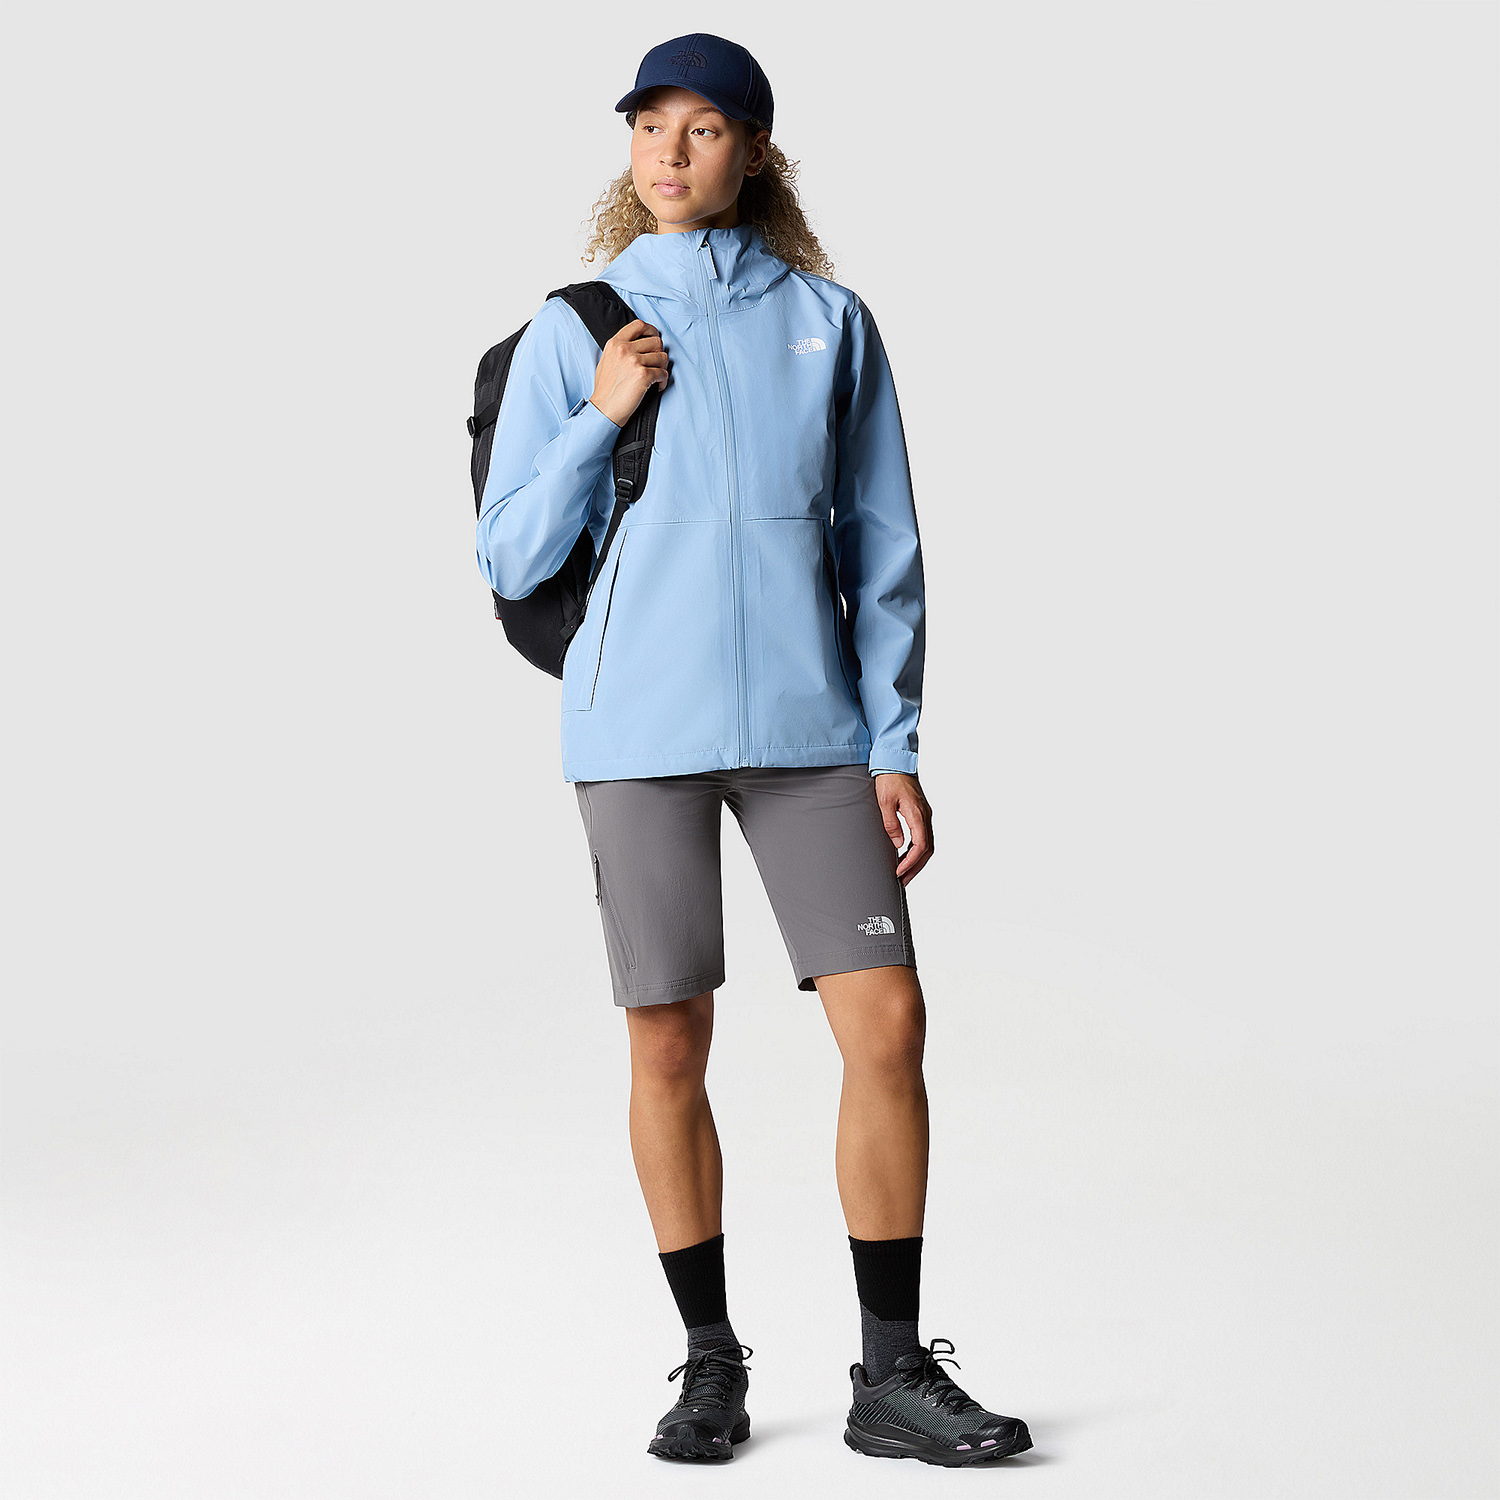 The North Face Speedlight 10in Pantaloncini - Smoked Pearl